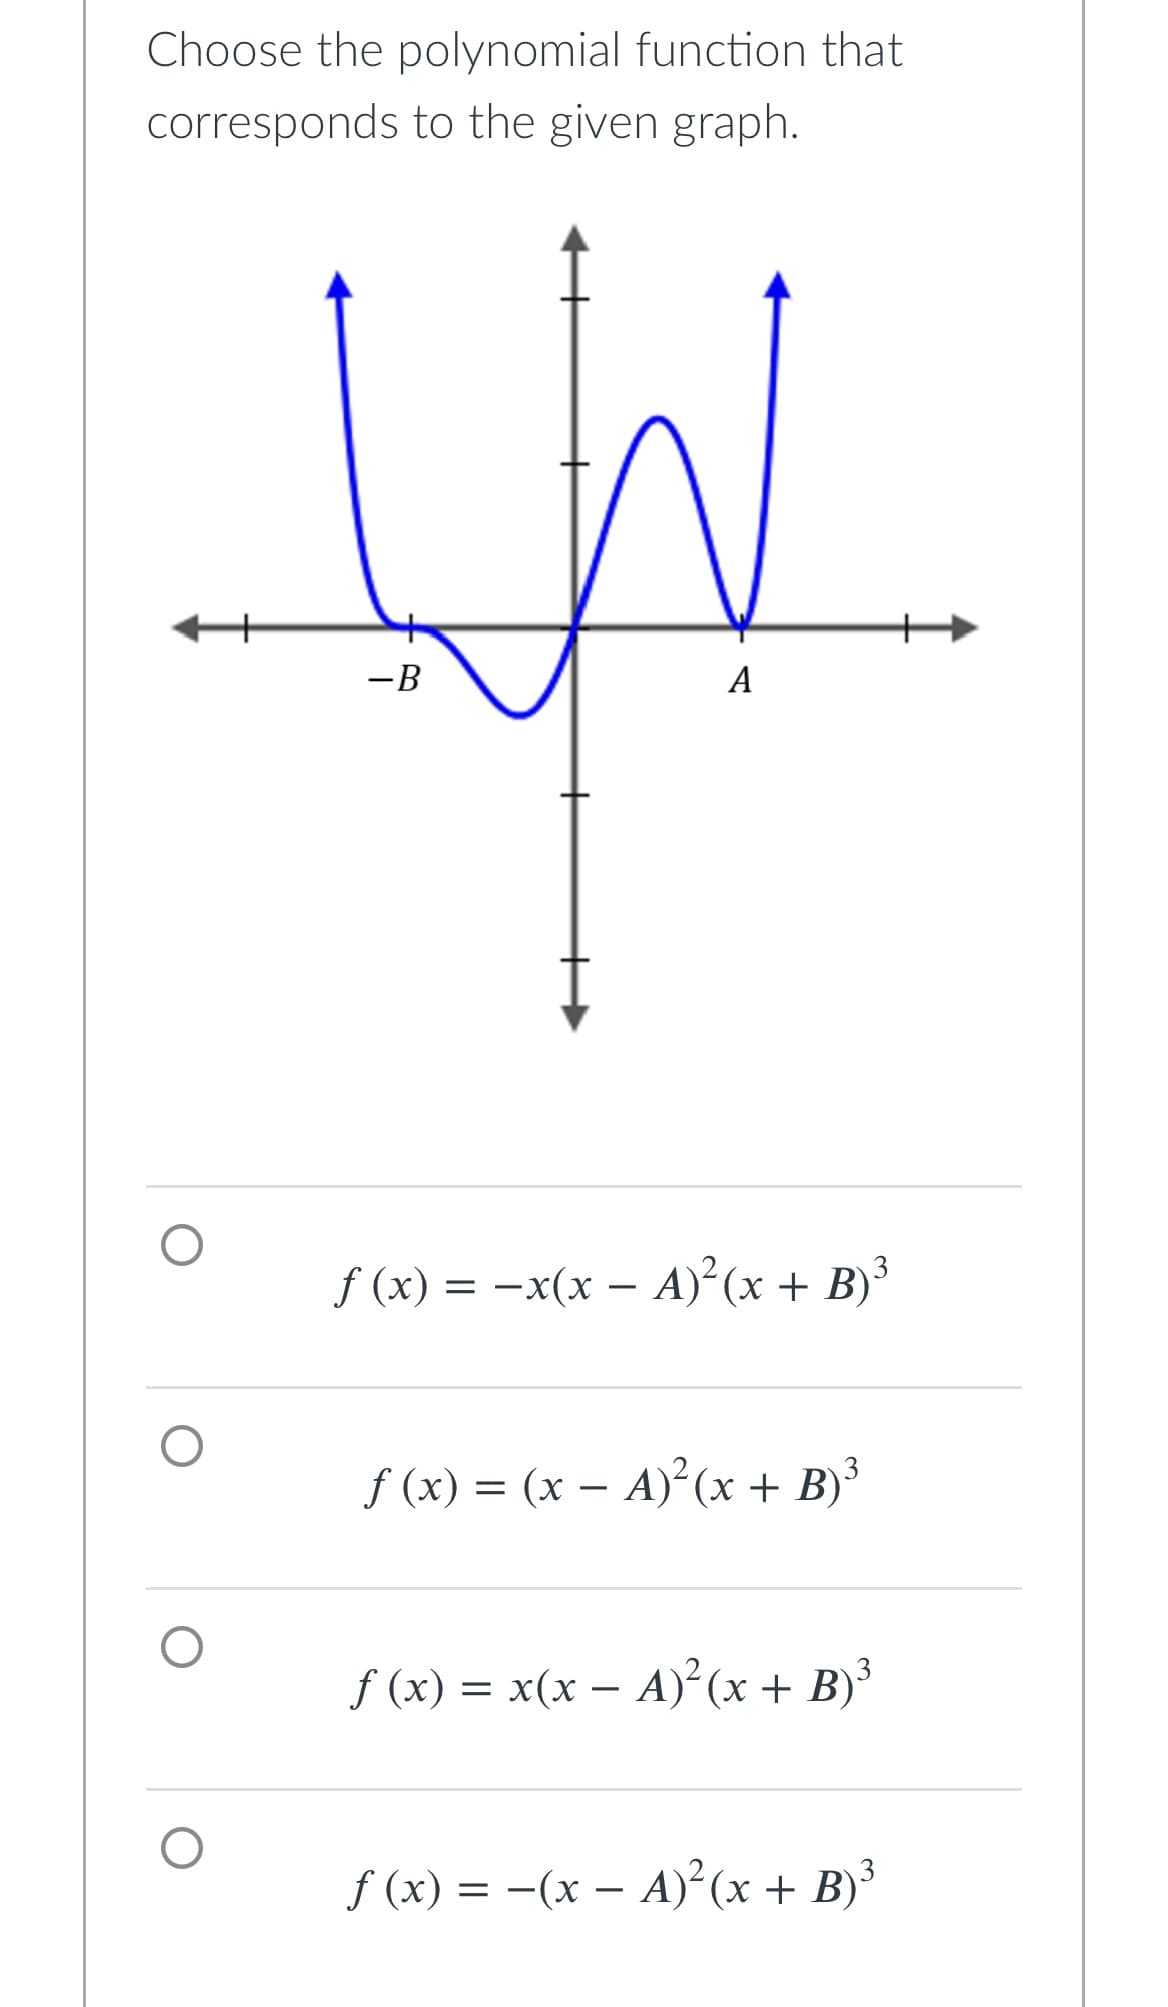 Choose the polynomial function that
corresponds to the given graph.
-B
A
f (x) = − x(x − A)²(x + B)³
ƒ(x) = (x − A)²(x + B) ³
ƒ (x) = x(x − A)²(x + B)³
f(x) = -(x - A)²(x + B)³
O
O
O